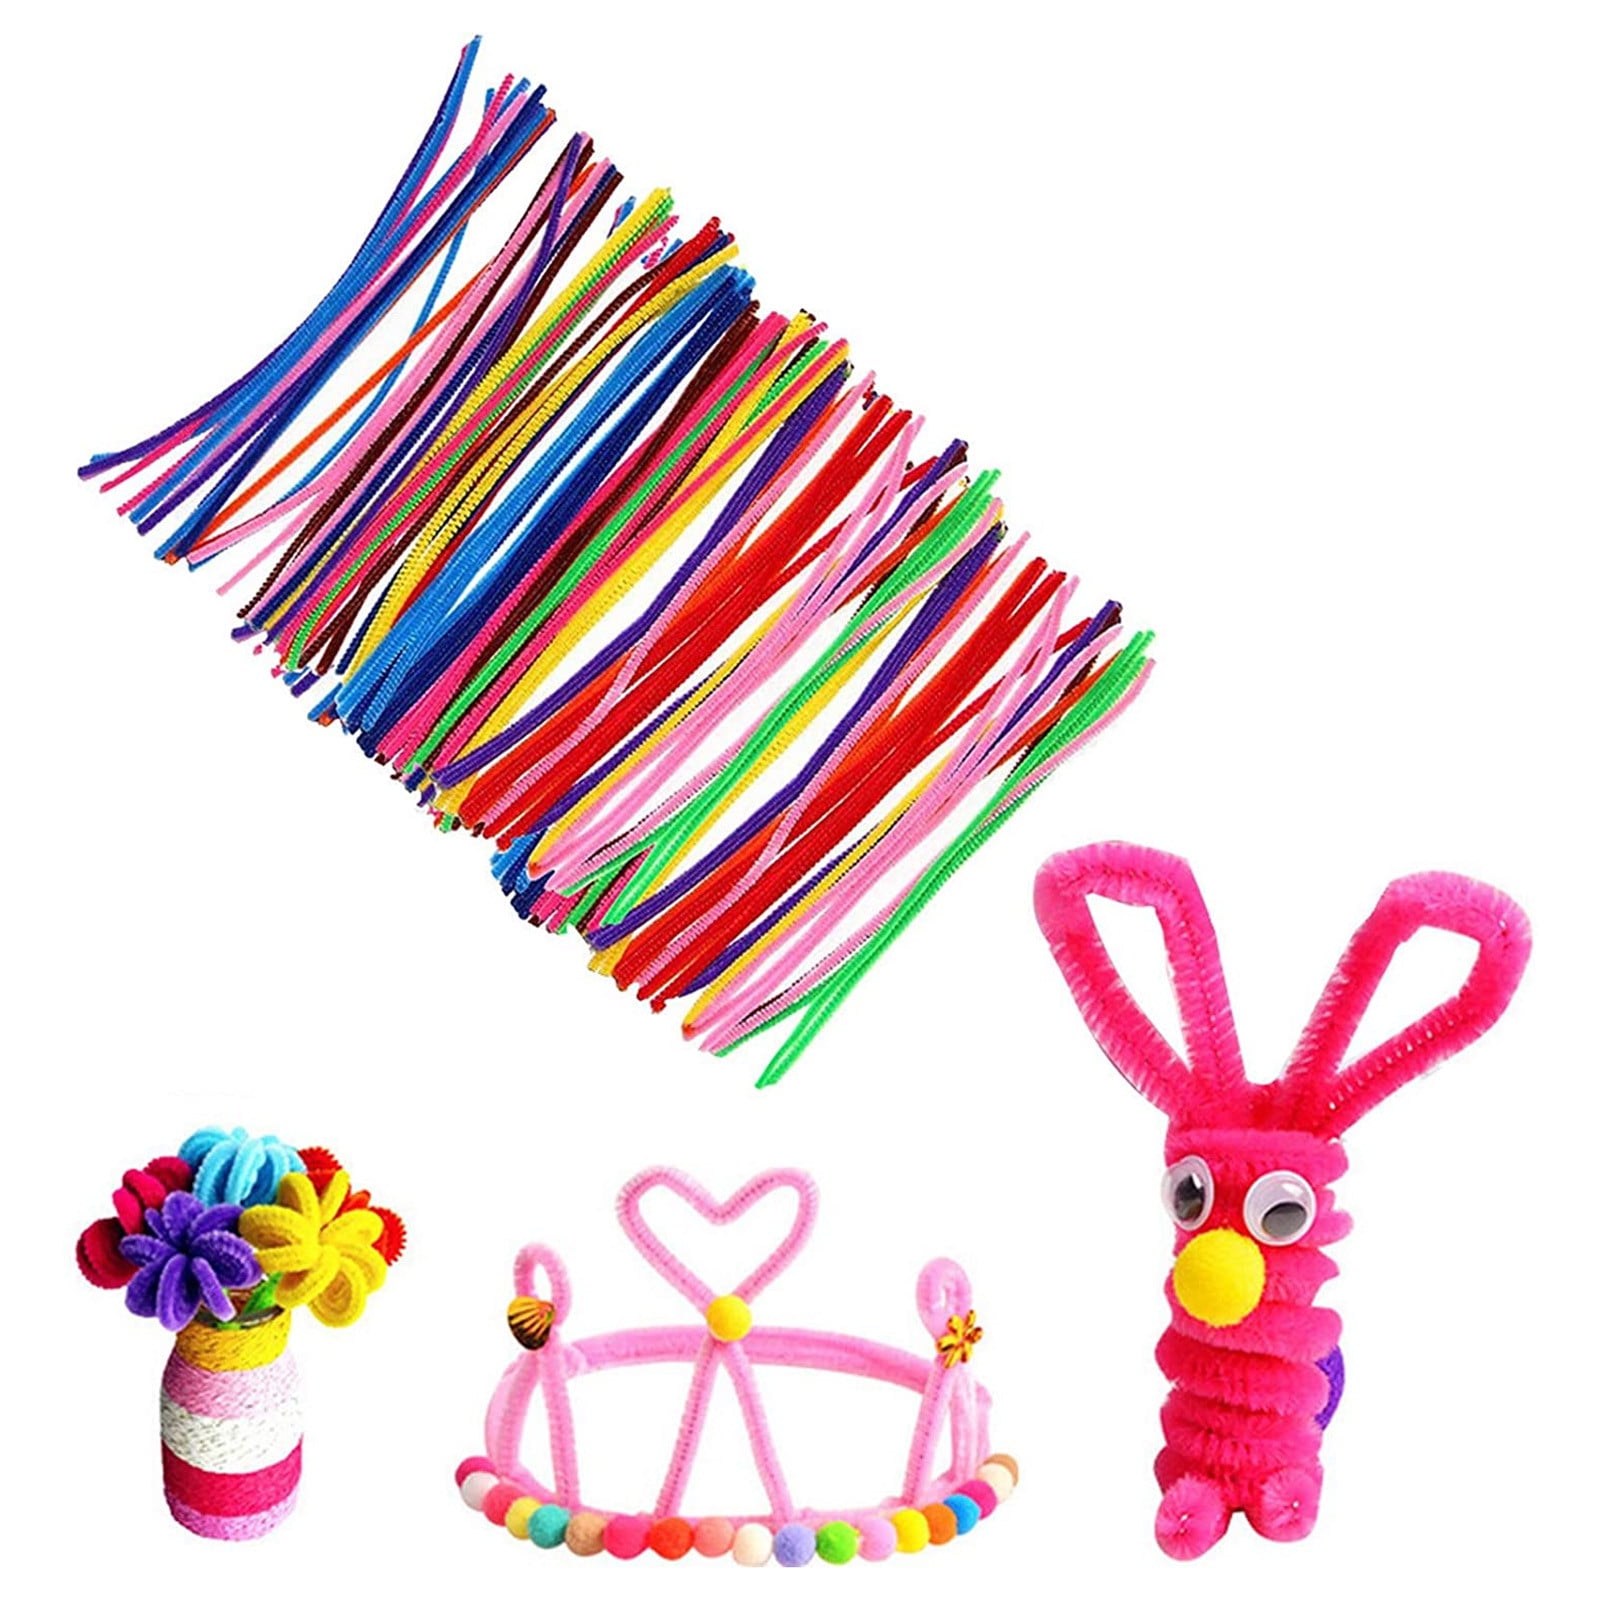 Pipe Cleaners, Pipe Cleaners Craft, Arts and Crafts, Crafts, Craft  Supplies, Art Supplies (Black)…